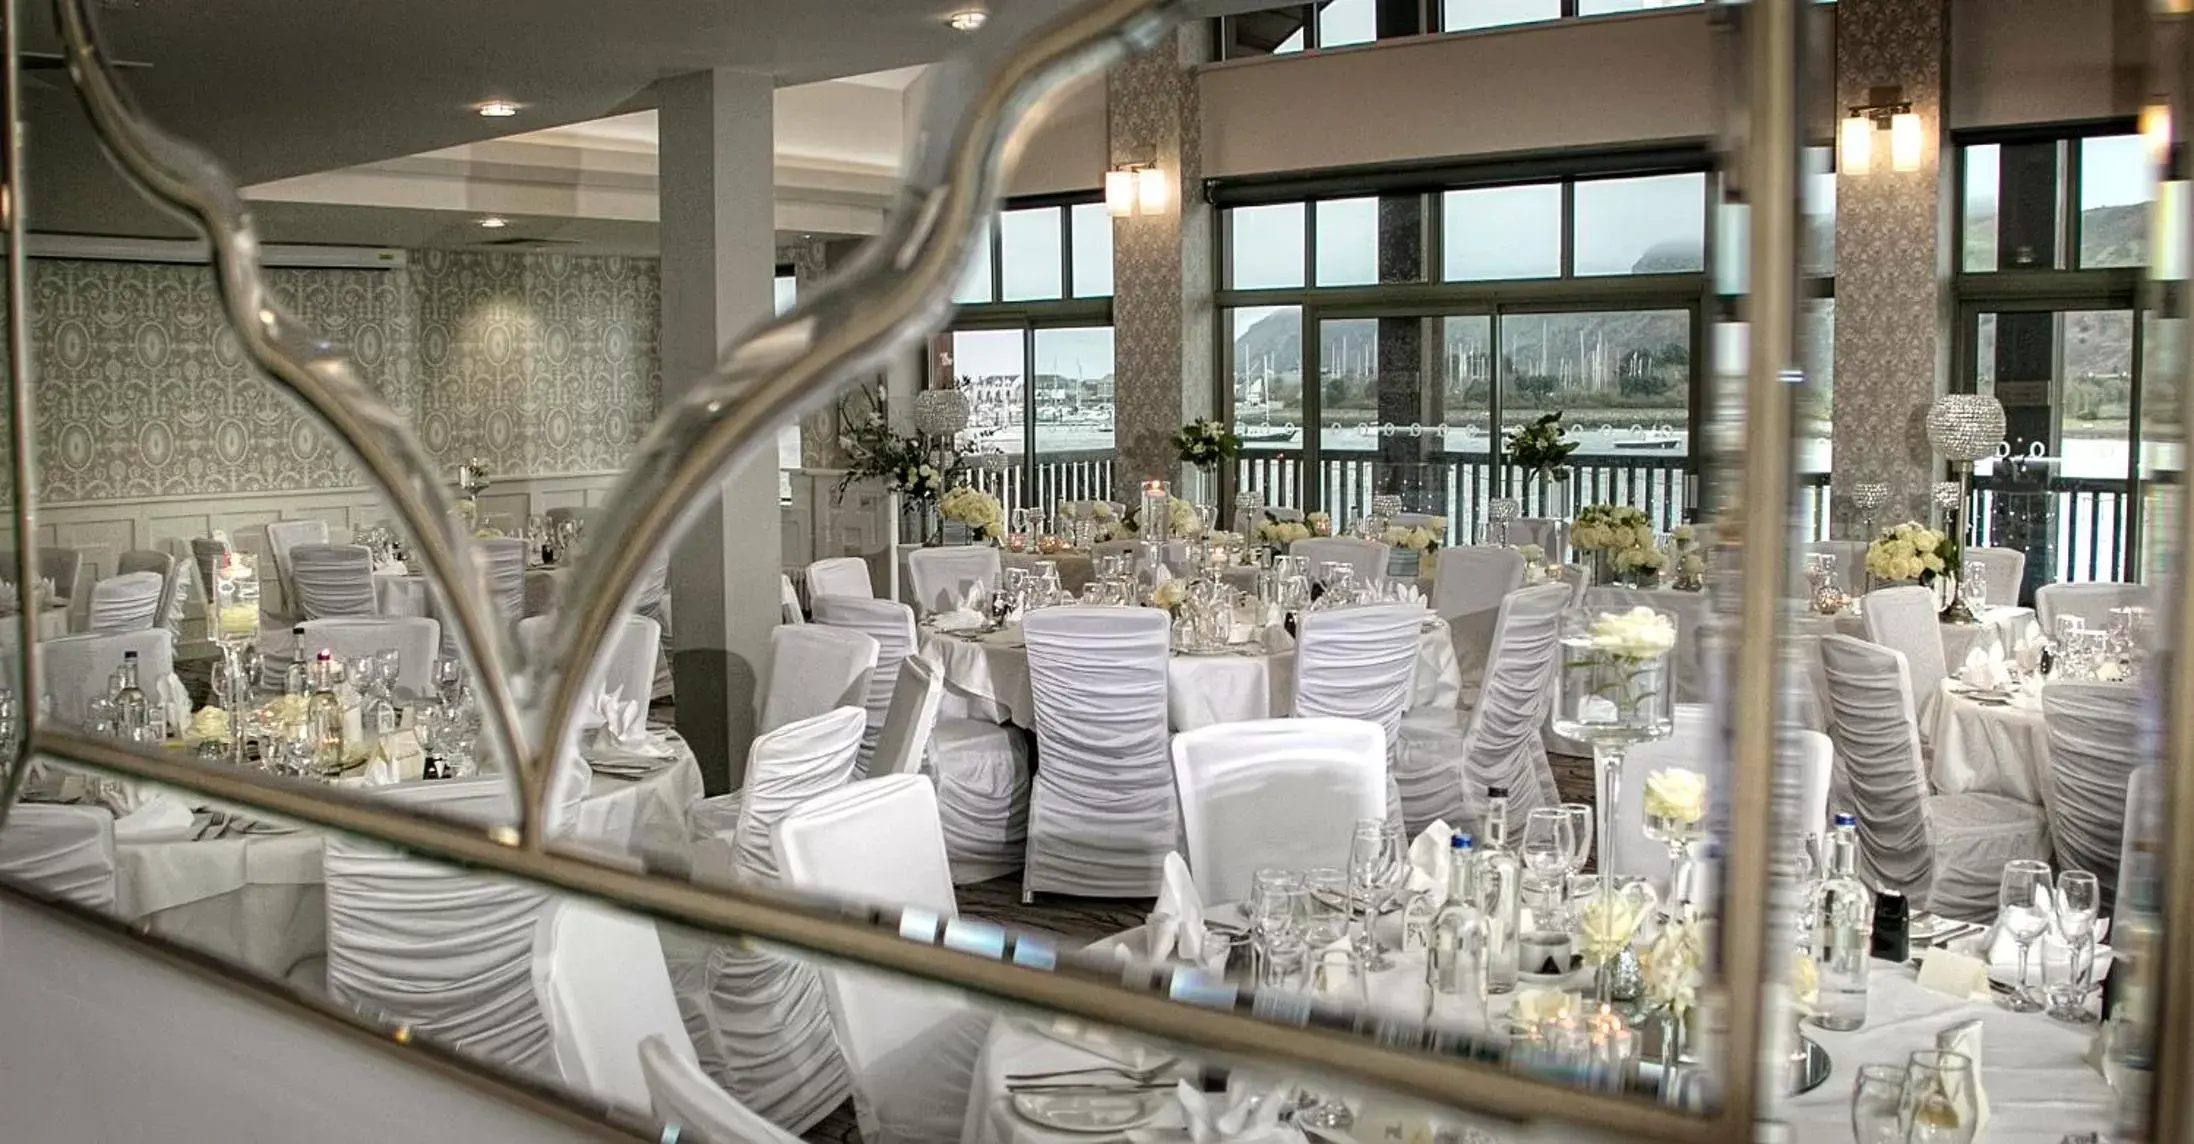 Banquet/Function facilities, Banquet Facilities in The Quay Hotel and Spa